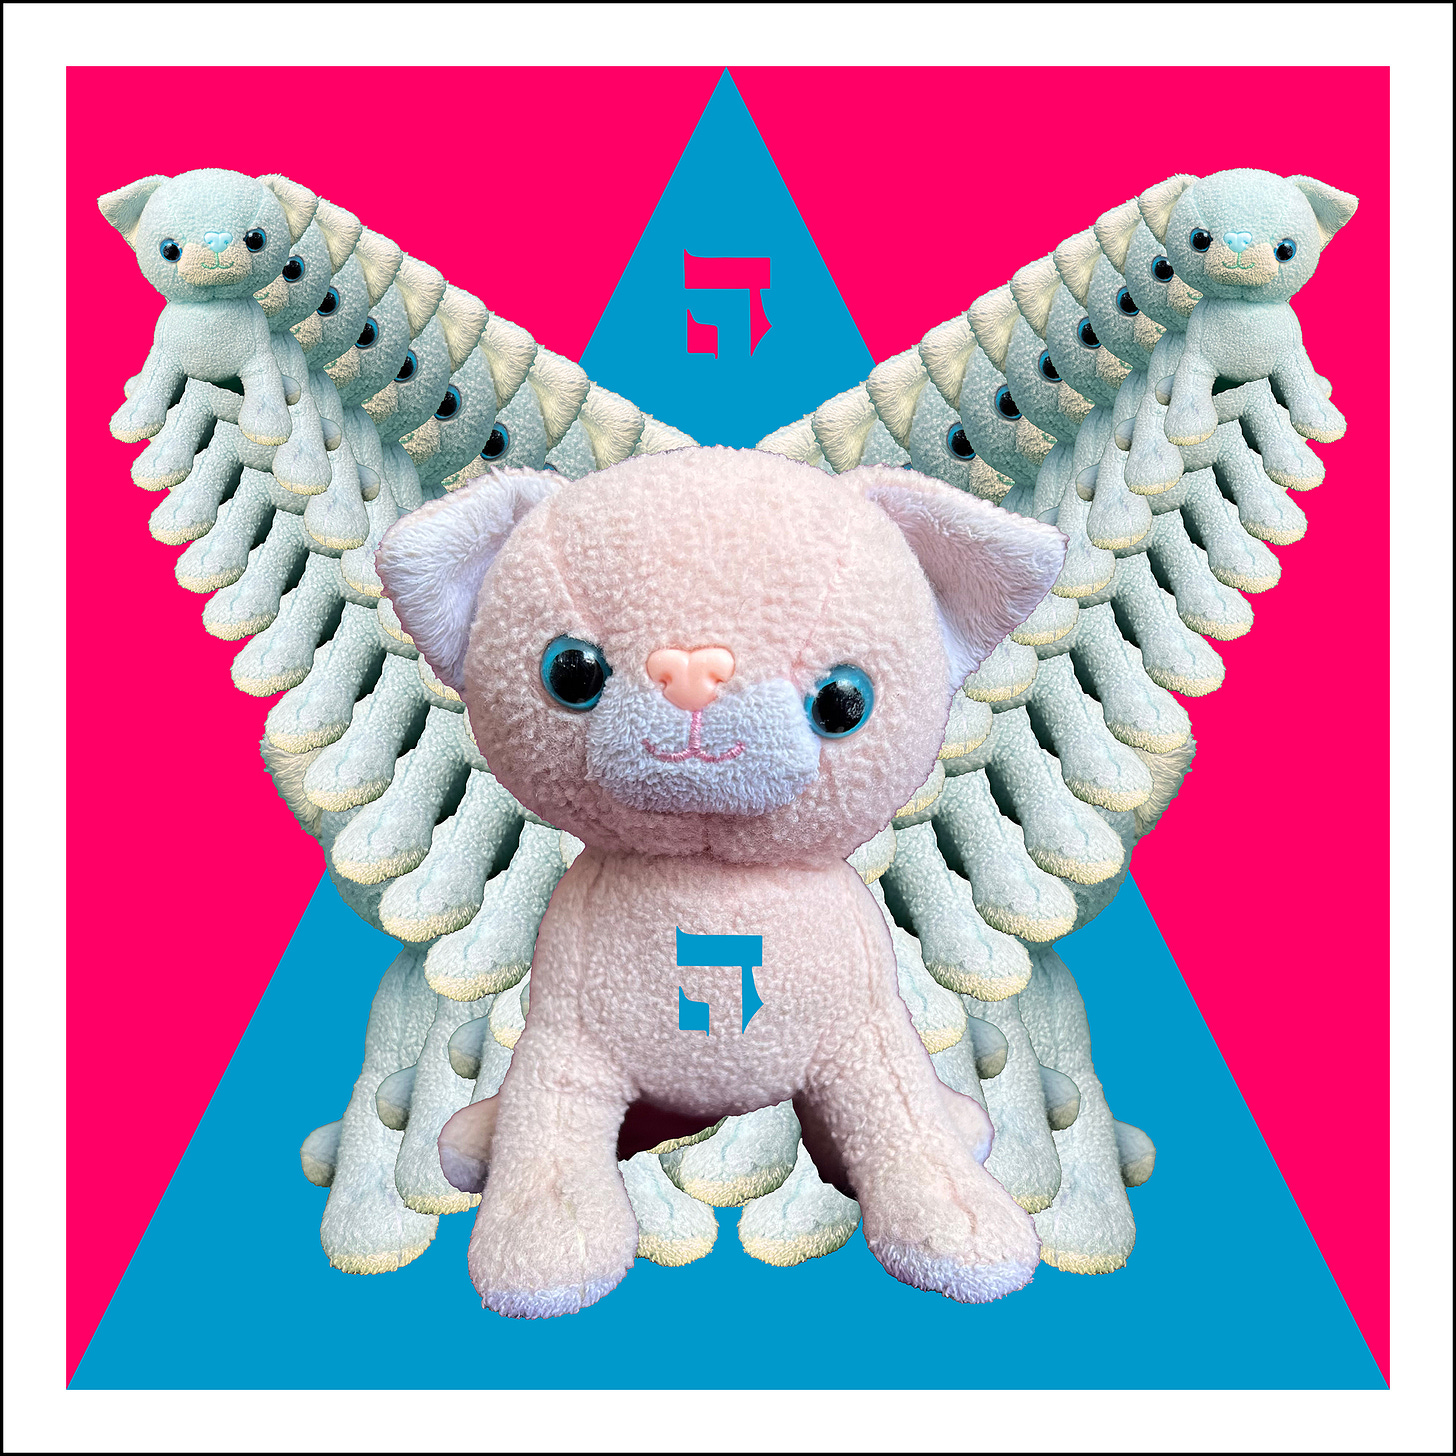 Rainbow Squared Series Six: 05. Red Blue. A pink stuffed animal cat with blue eyes is duplicated as a blue cat in a winged array behind it. The Hebrew letter Hay is floating above as well as on its chest. 